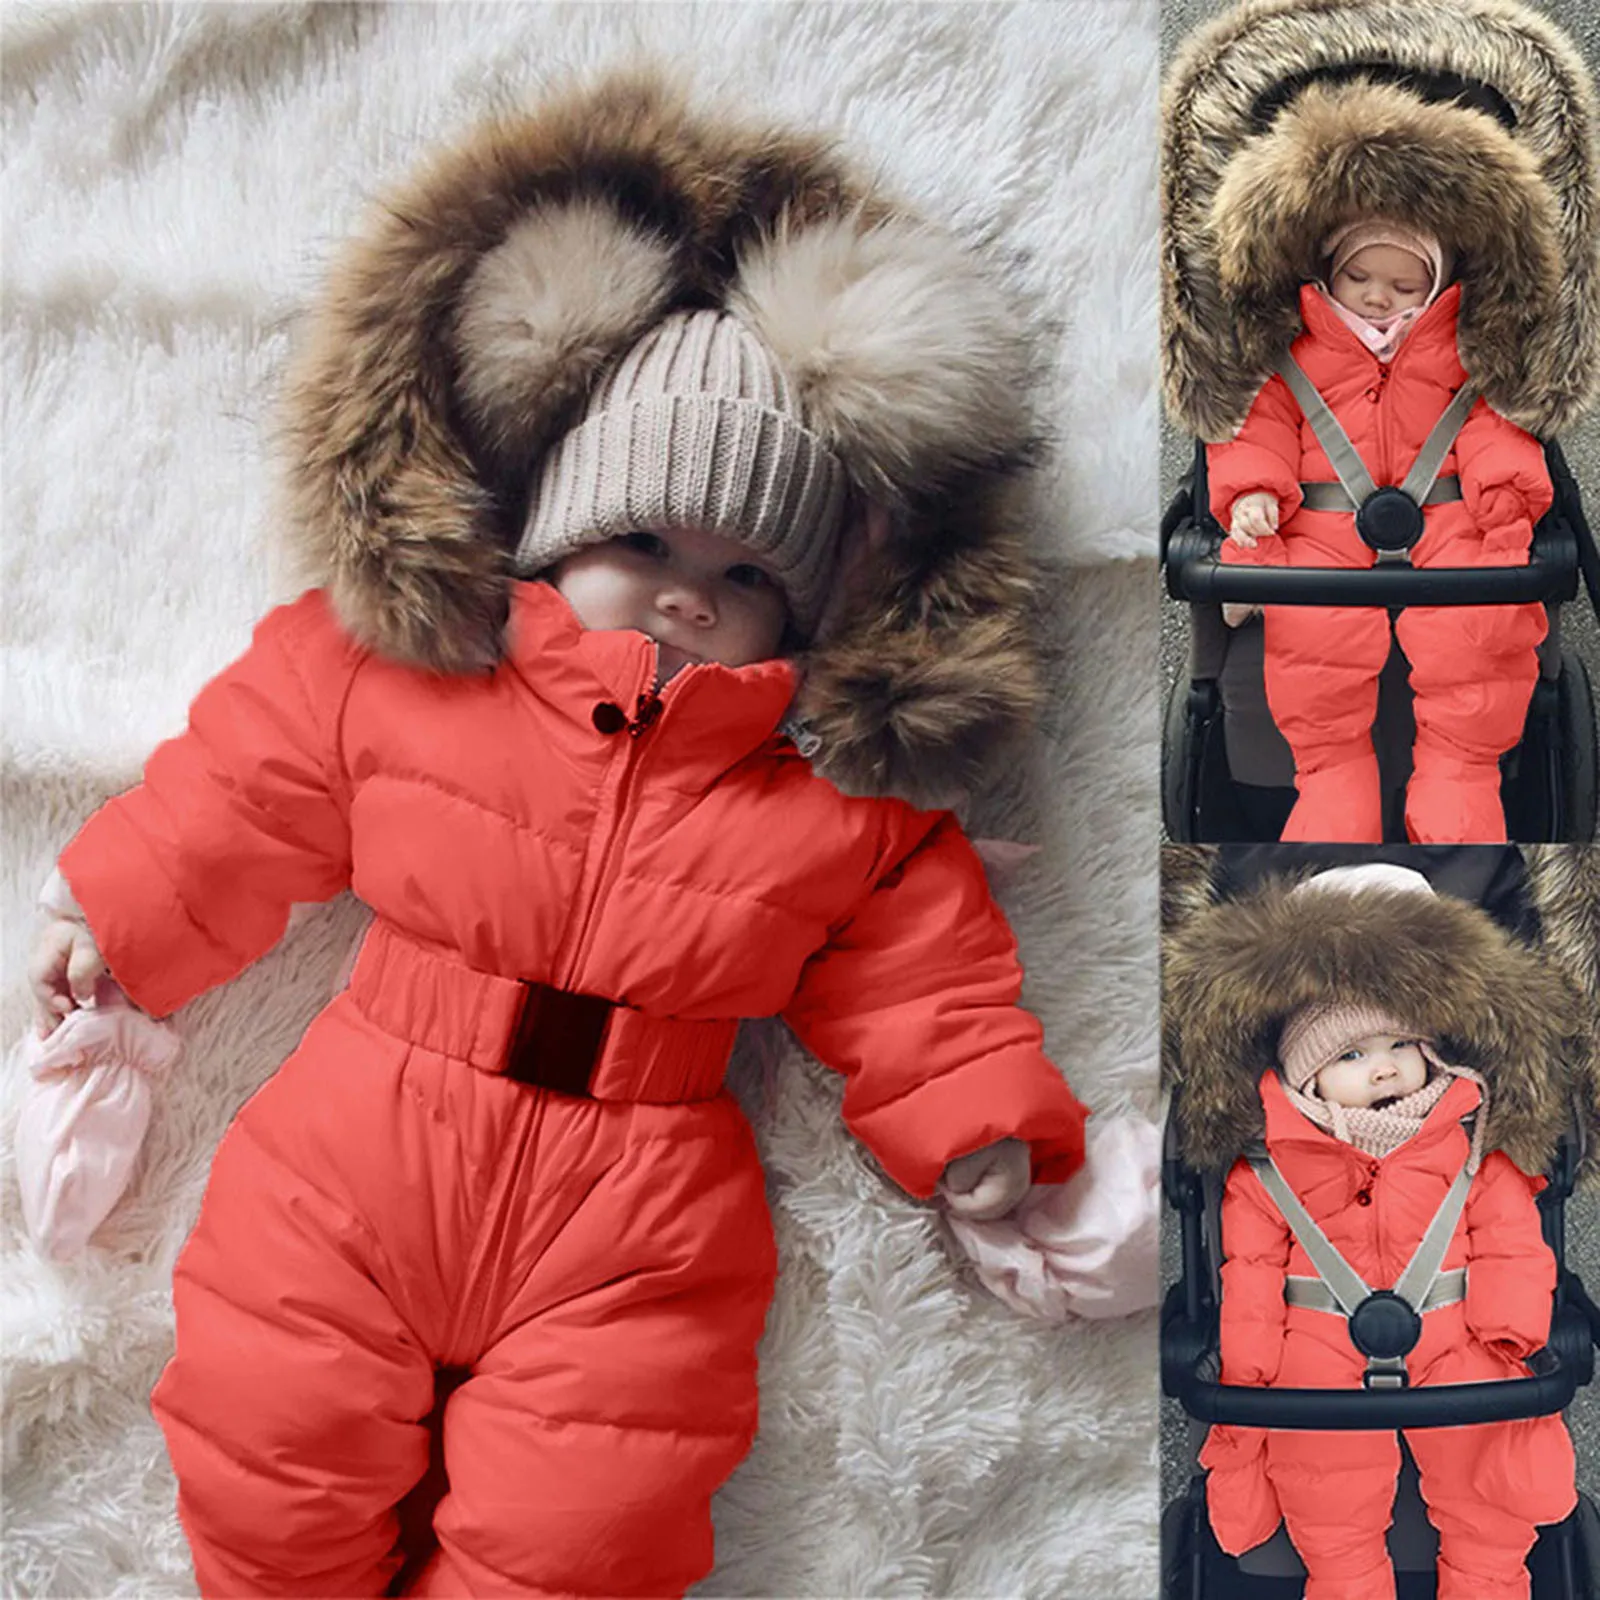 Child Kids Baby Girl Winter Warm Coat Hooded Thick Jacket Outwear Parka Snowsuit 